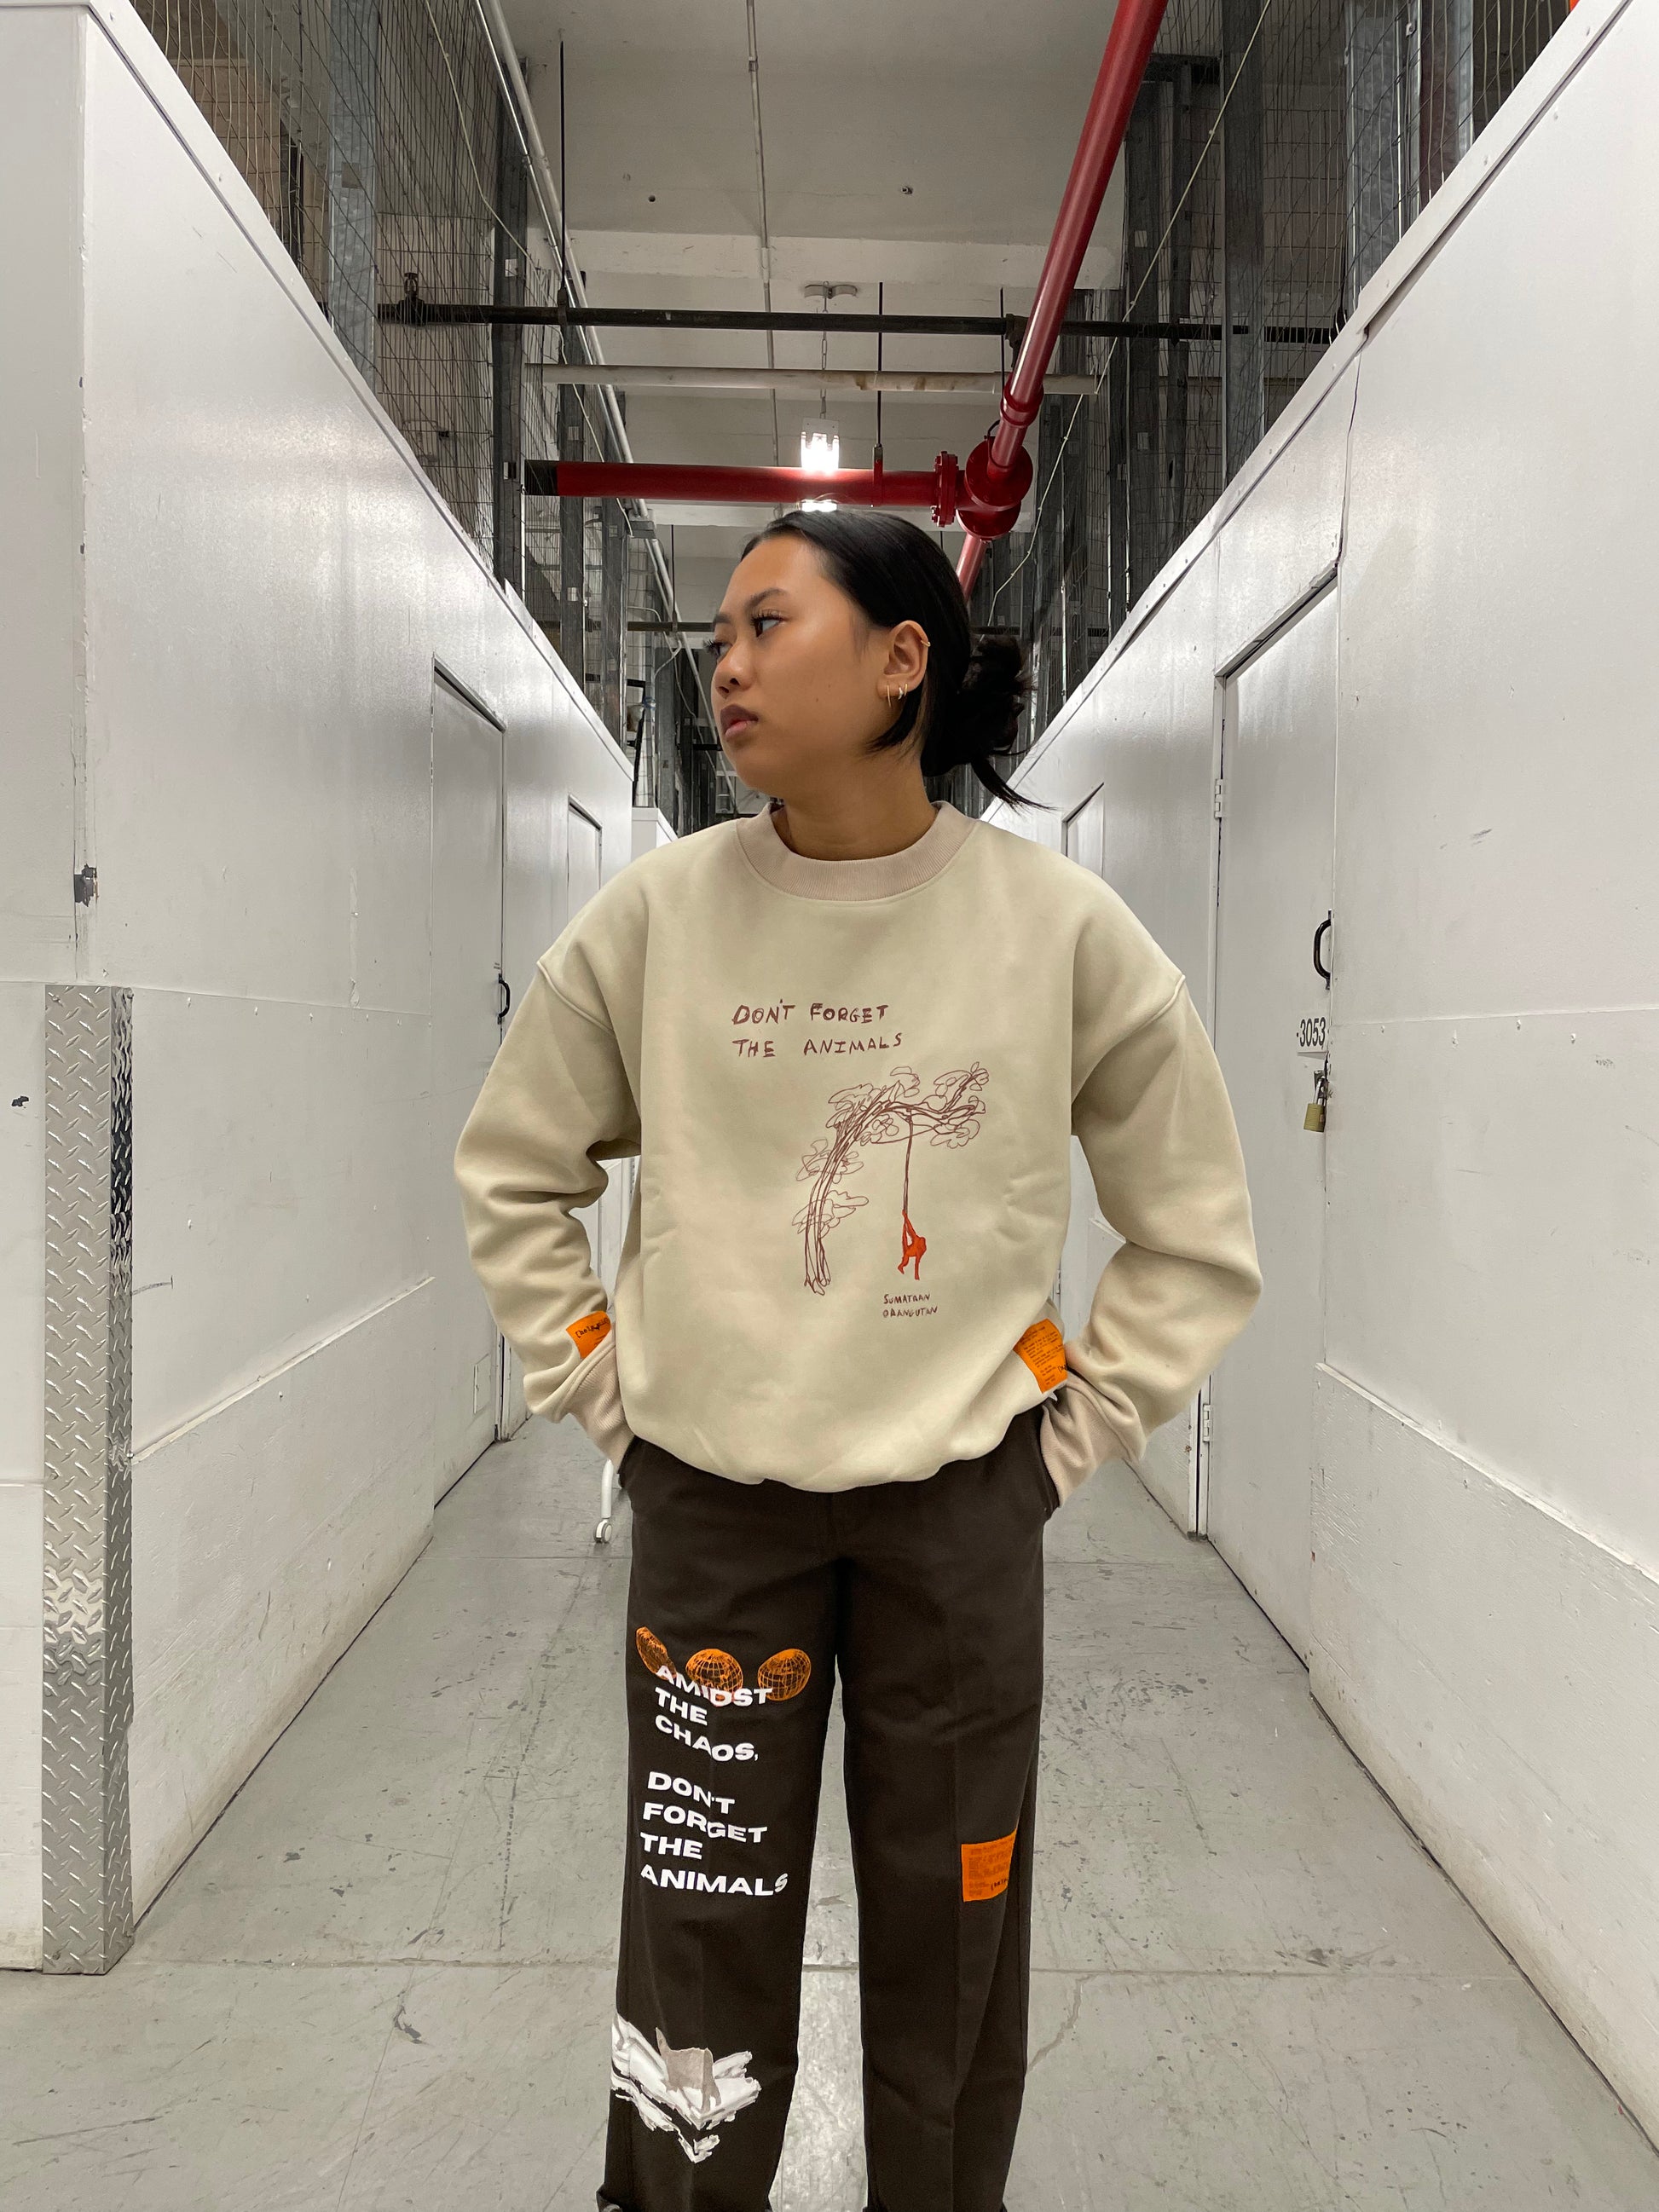 Orangutan Endangered Species sweater made of organic cotton in the streetwear style and work pants with polar bear artwork